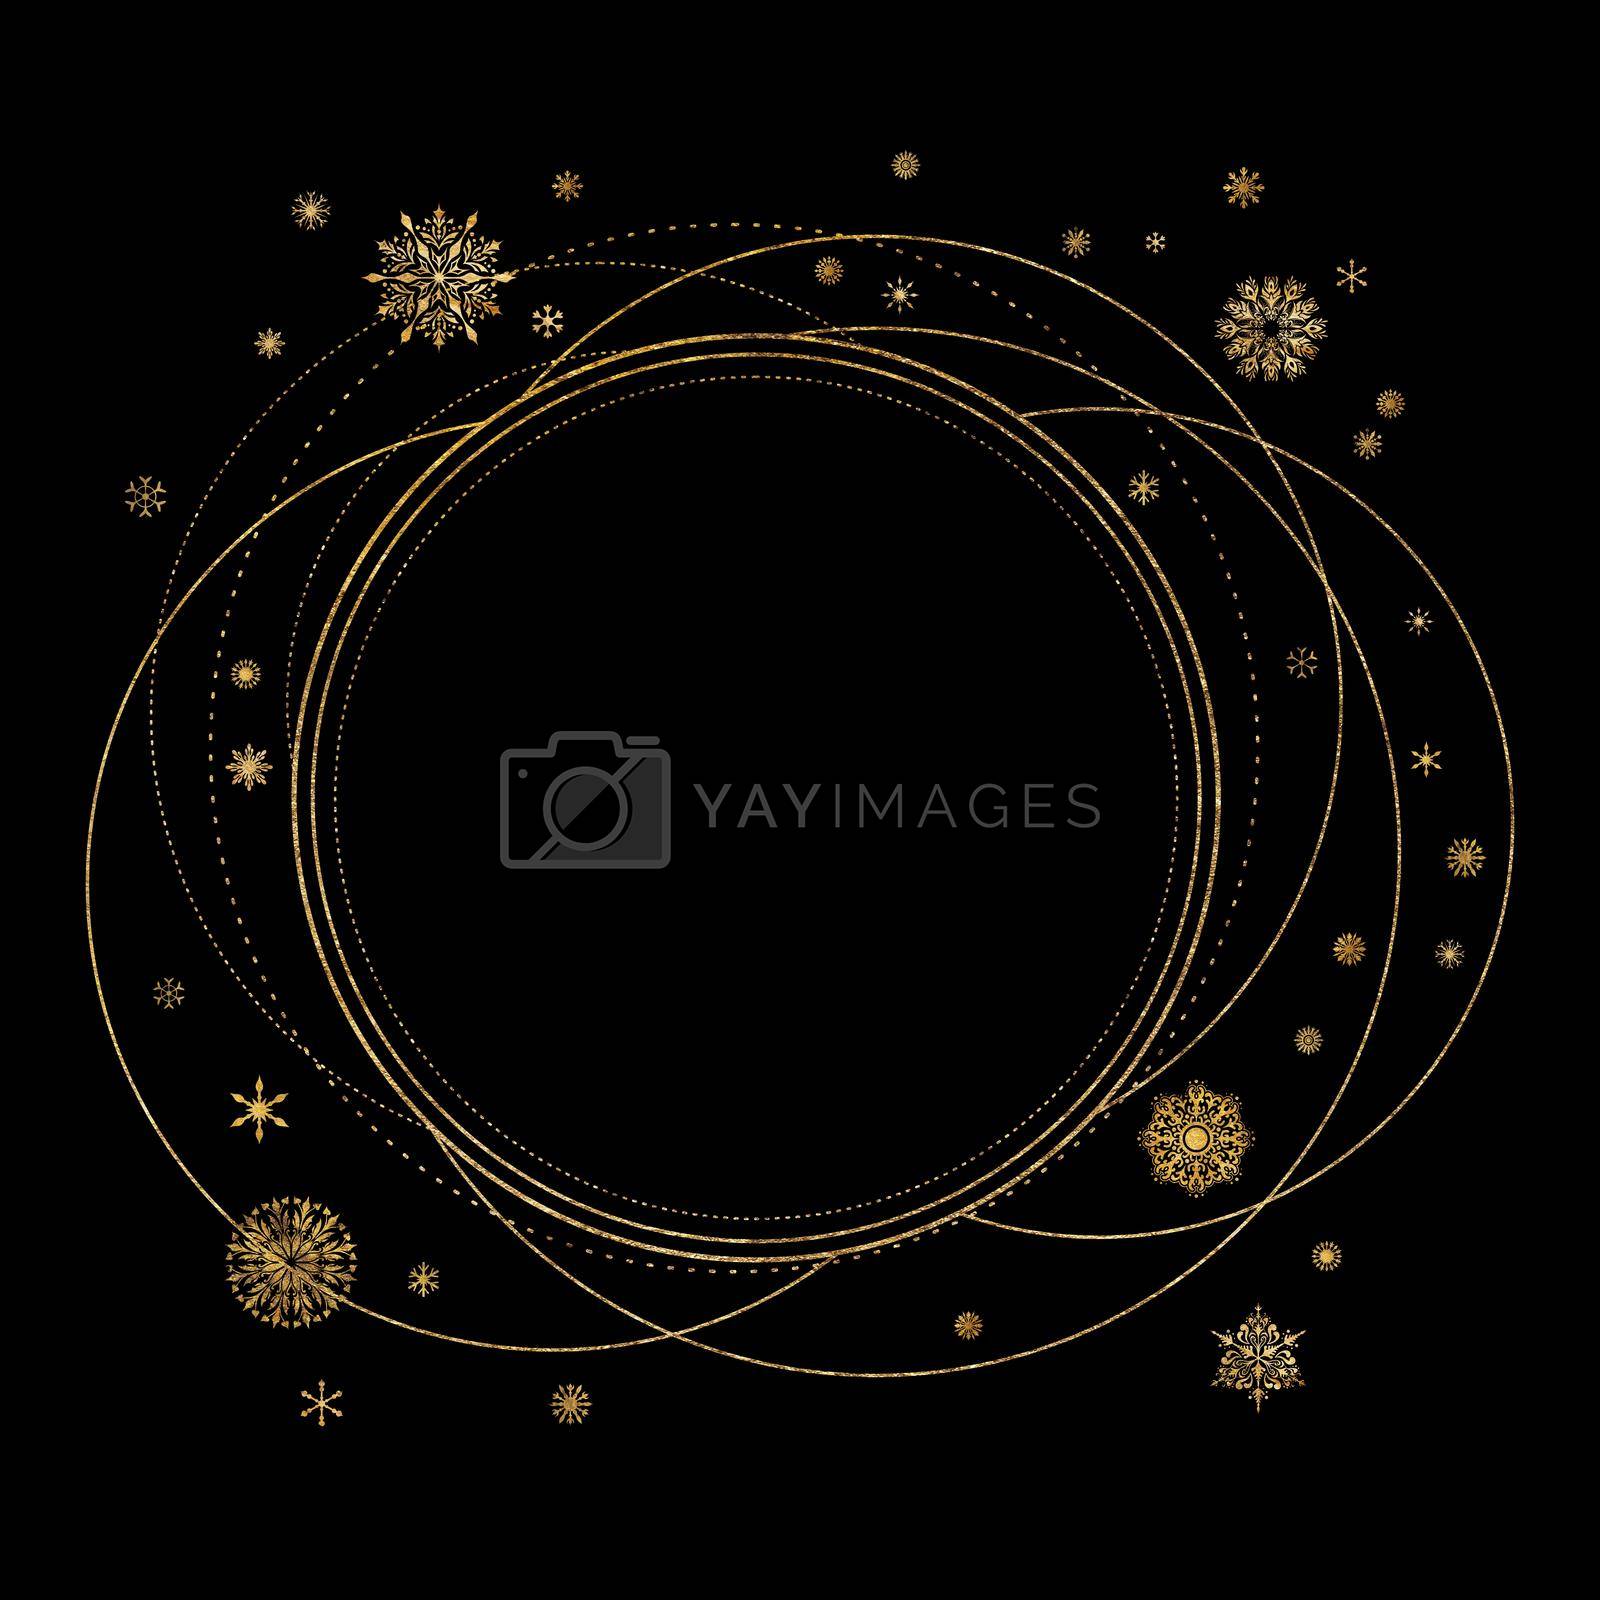 Royalty free image of Gold Glitter Festive Christmas Frame with Snowflakes by kisika